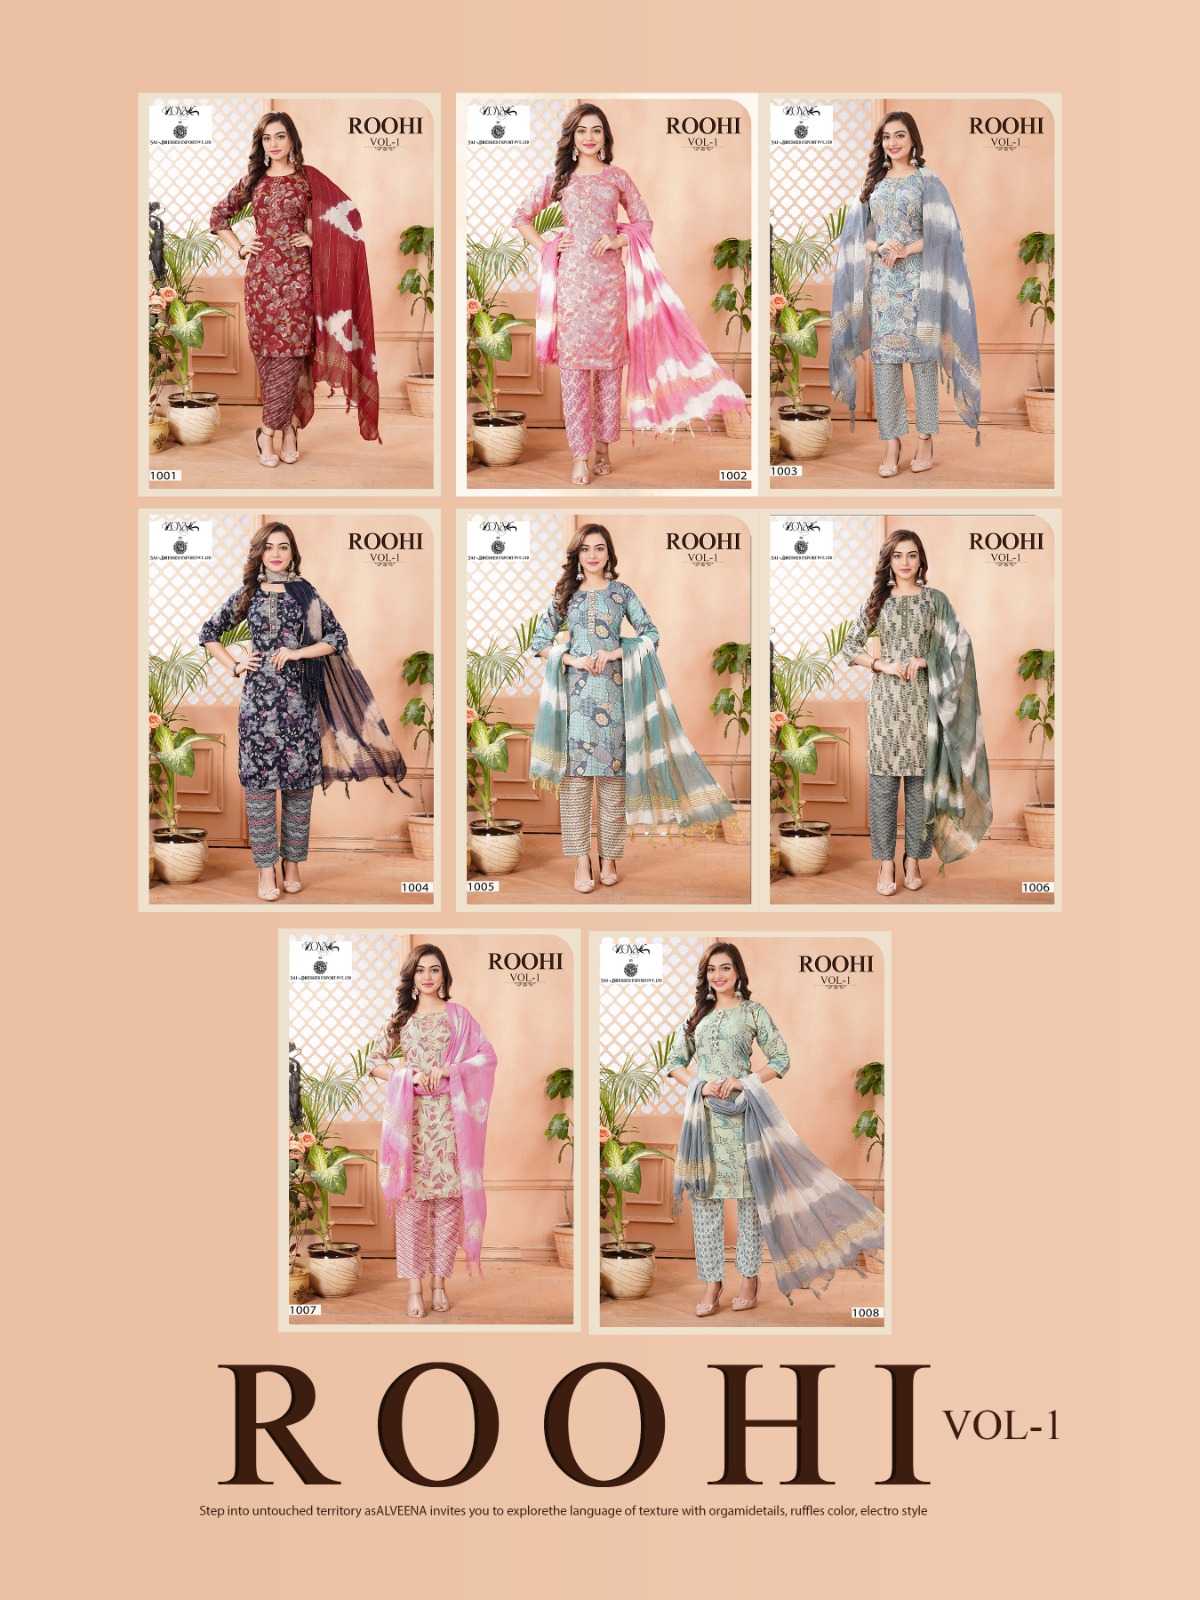 SAI DRESSES PRESENT ROOHI VOL 1 READY TO DAILY WEAR CAPSUL PRINTED PANT STYLE 3 PIECE SUITS IN WHOLESALE RATE IN SURAT